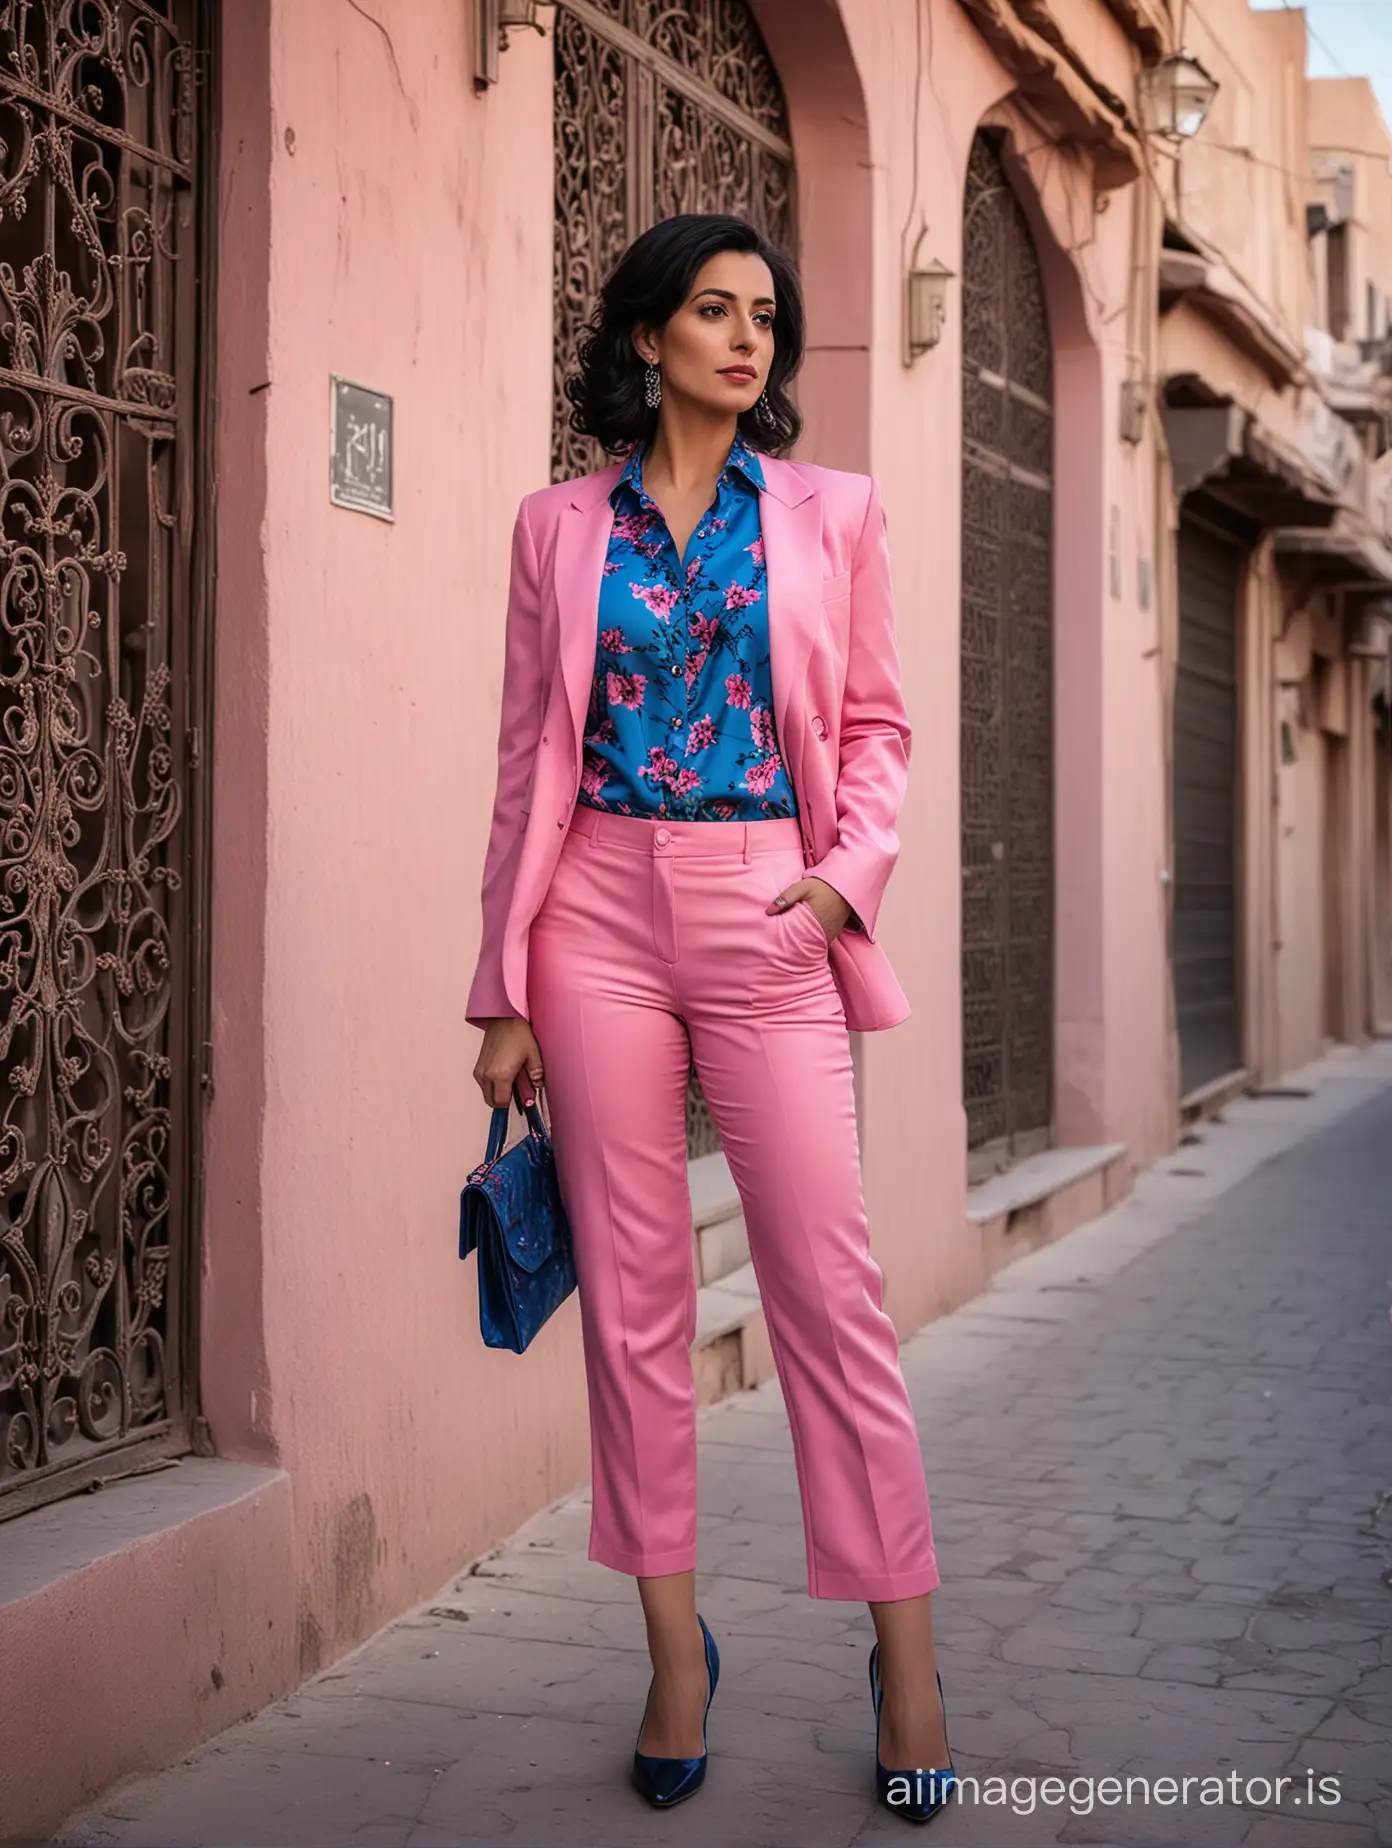 Fashionable-Iranian-Woman-in-Pink-Suit-with-Blue-Flower-Pattern-in-Kashan-Street